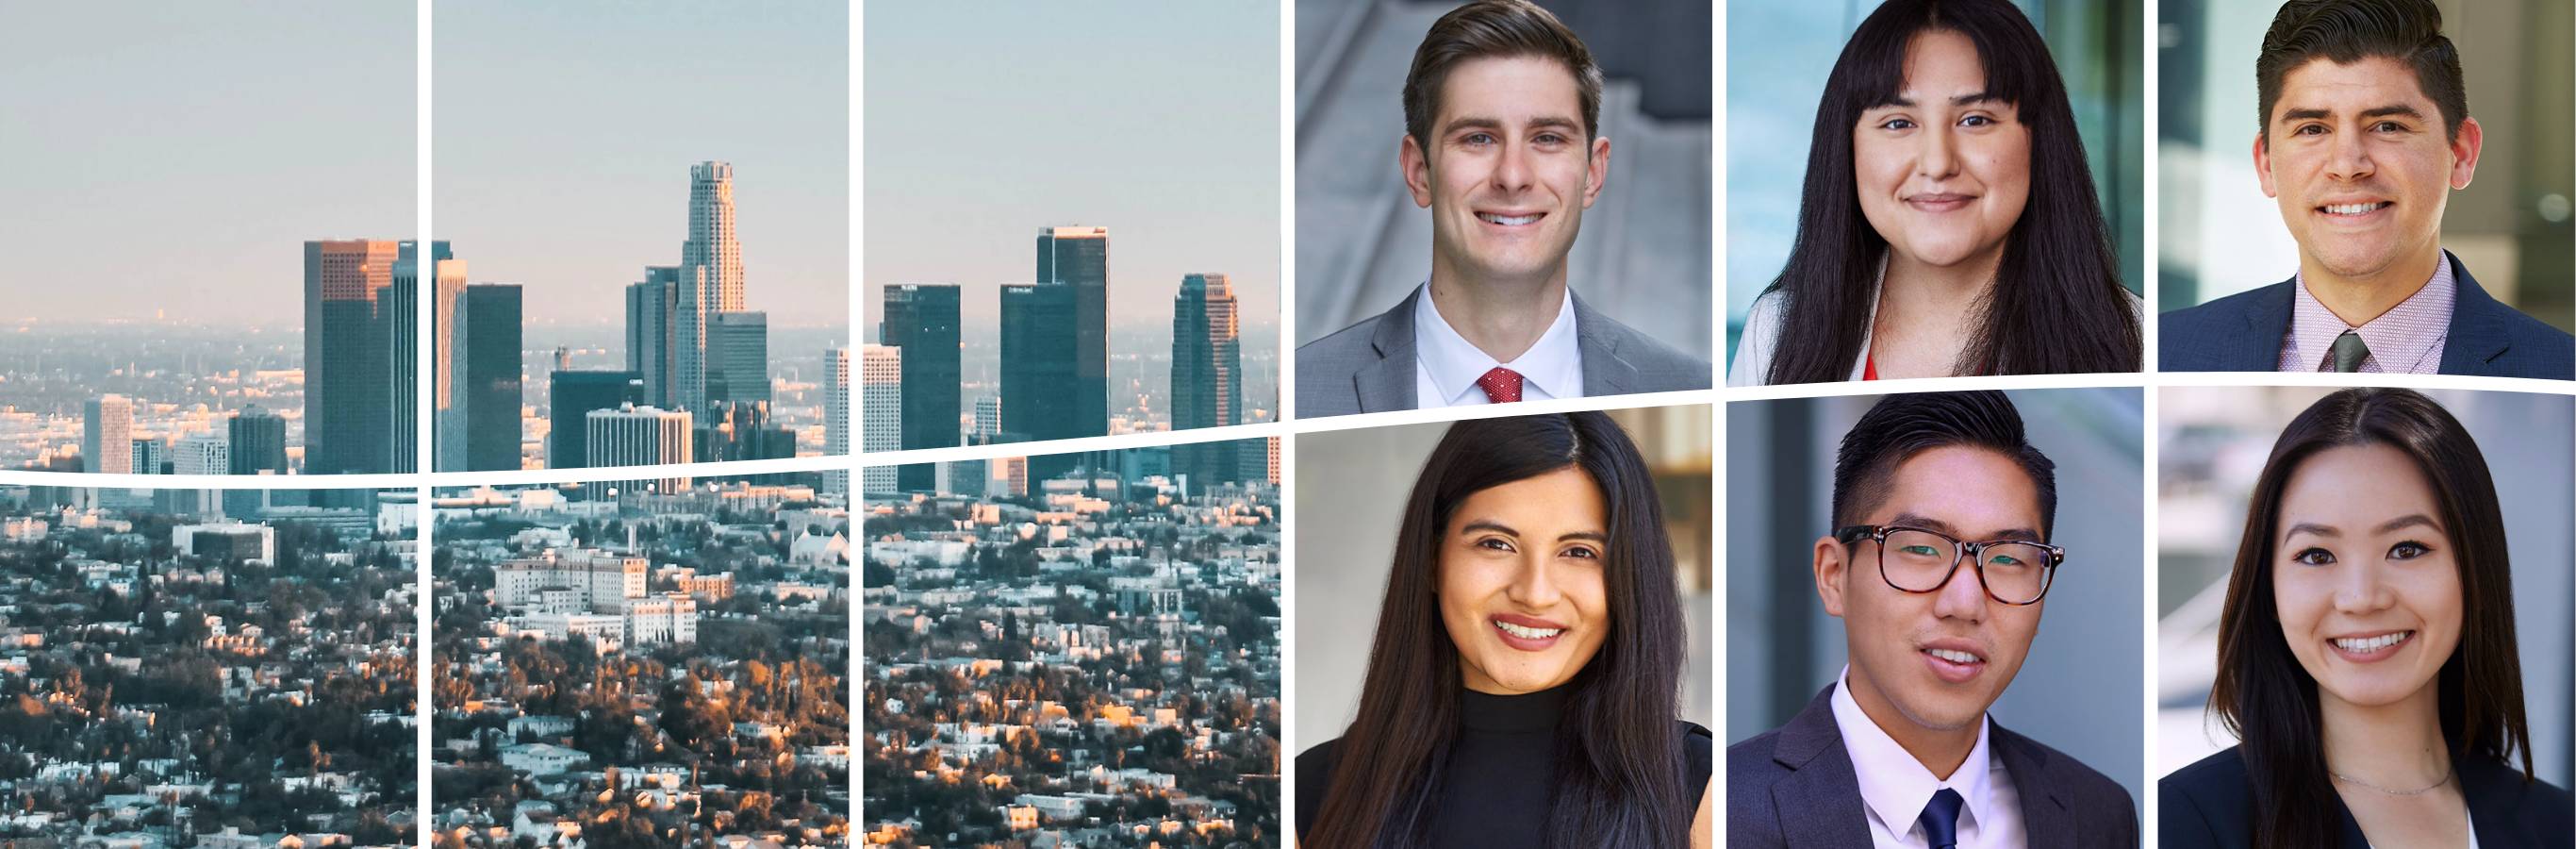 Collage of Los Angeles skyline and a diverse group of team members